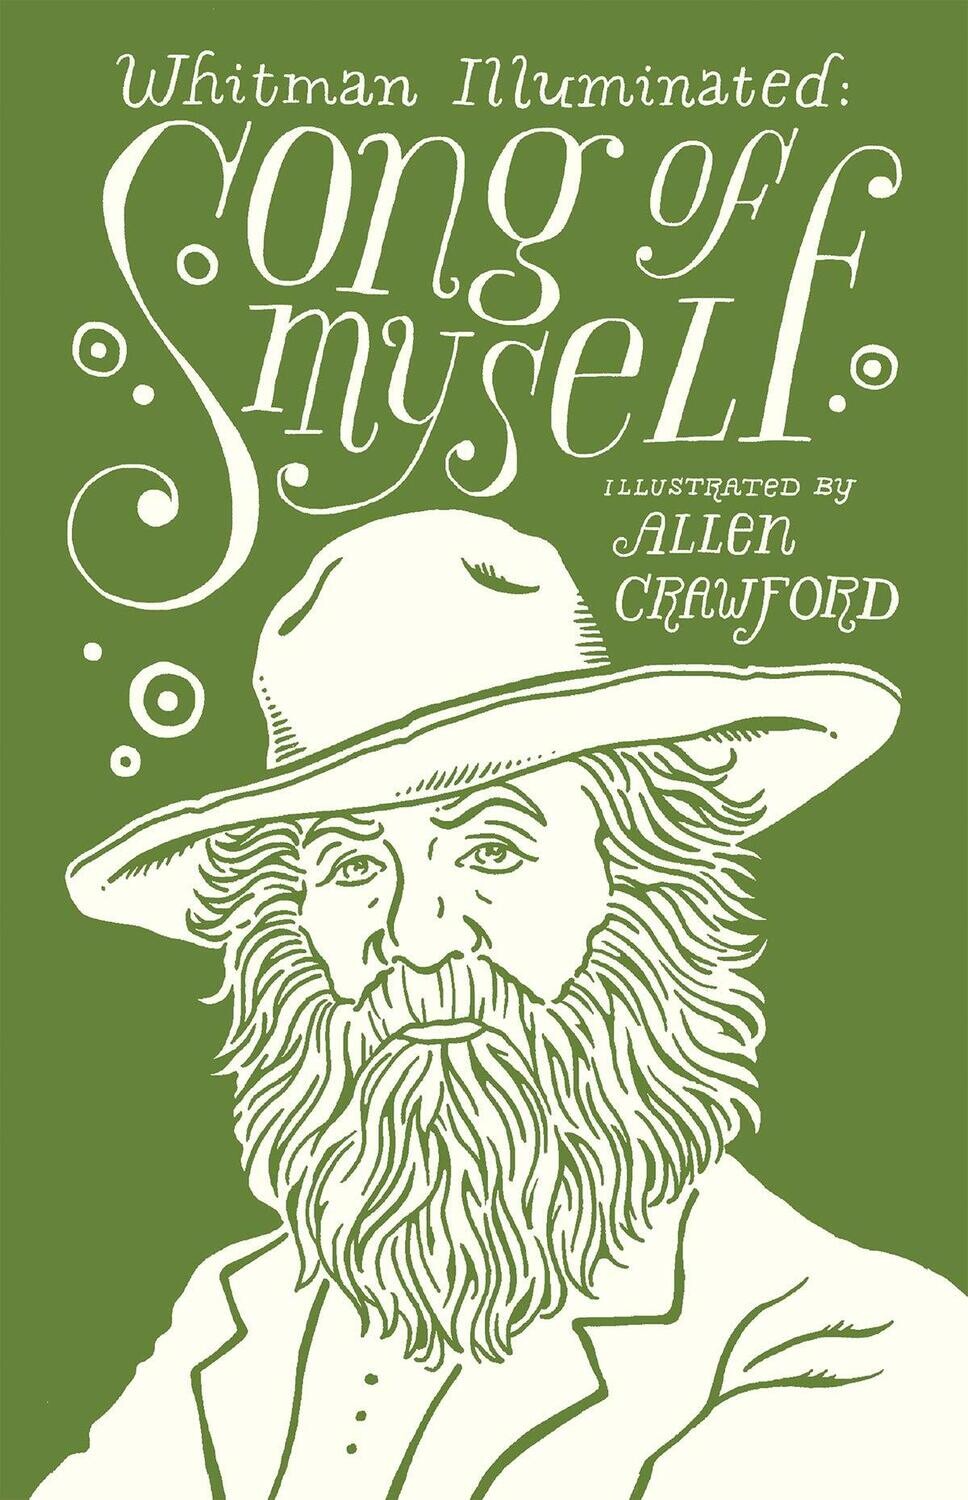 Whitman Illuminated: Song of Myself by Walt Whitman (Illustrated by Allen Crawford)